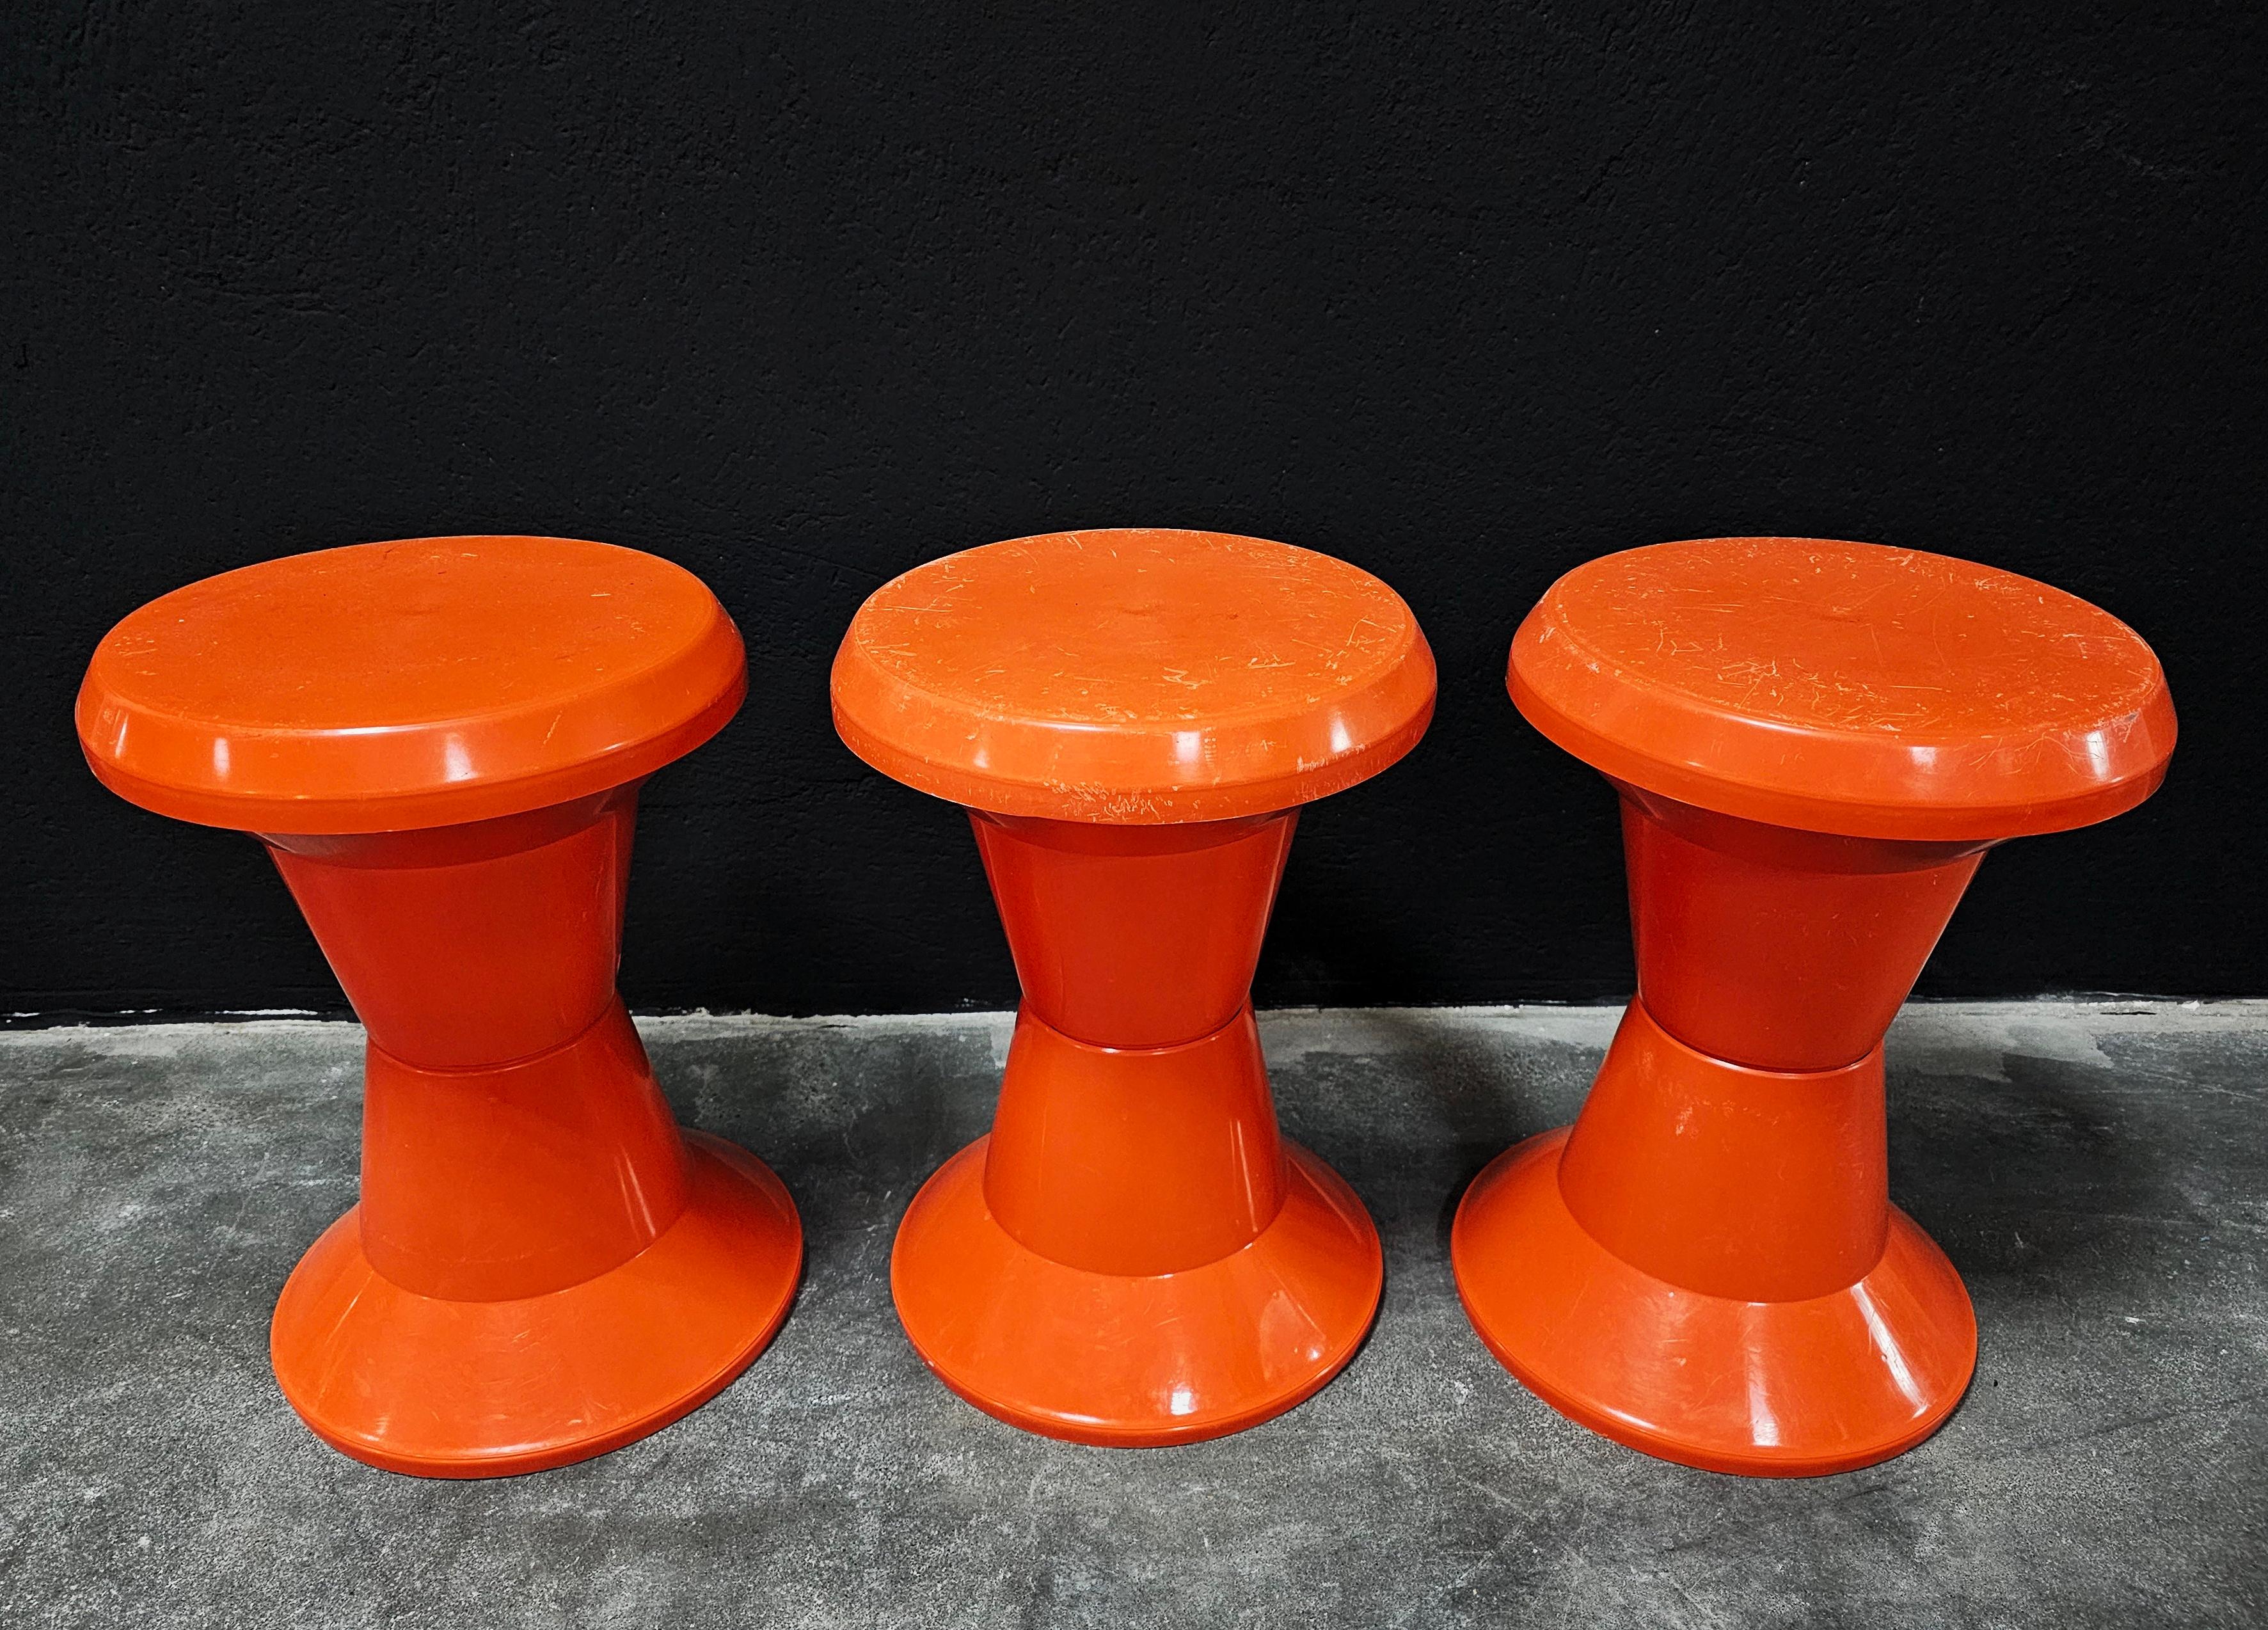 In this listing you will find a set of 3 orange space age stools manufactured by Kovinoplatika Yugoslavia, in 1970s. They feature very practical design, allowing you to easily stack them one into the other and store them away when not needed. They